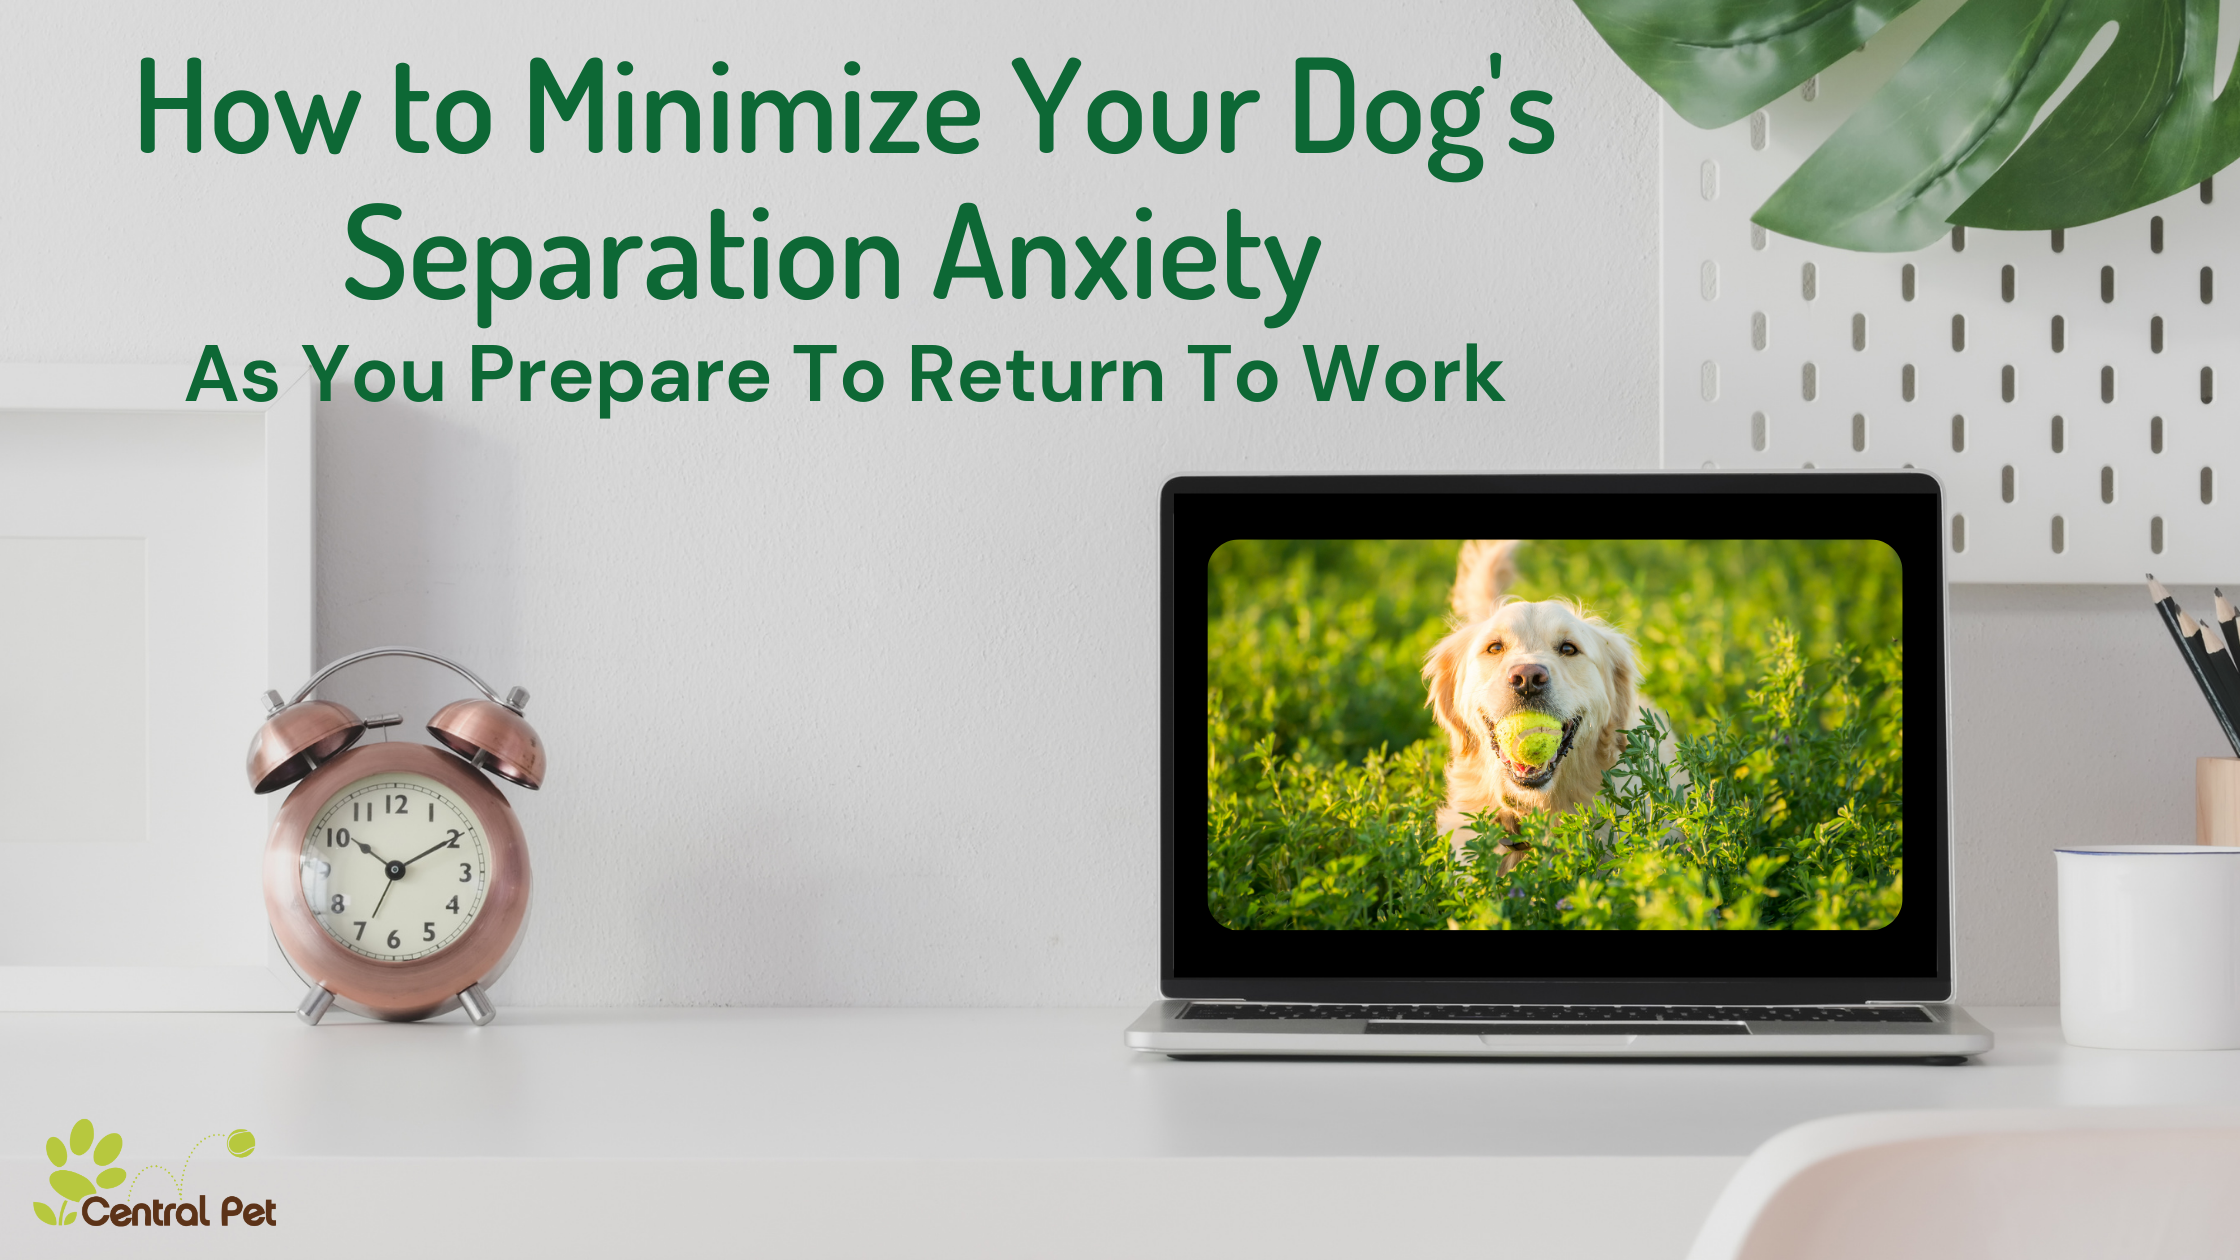 How to Minimize Your Dog's Anxiety as You Prepare to Return to Work